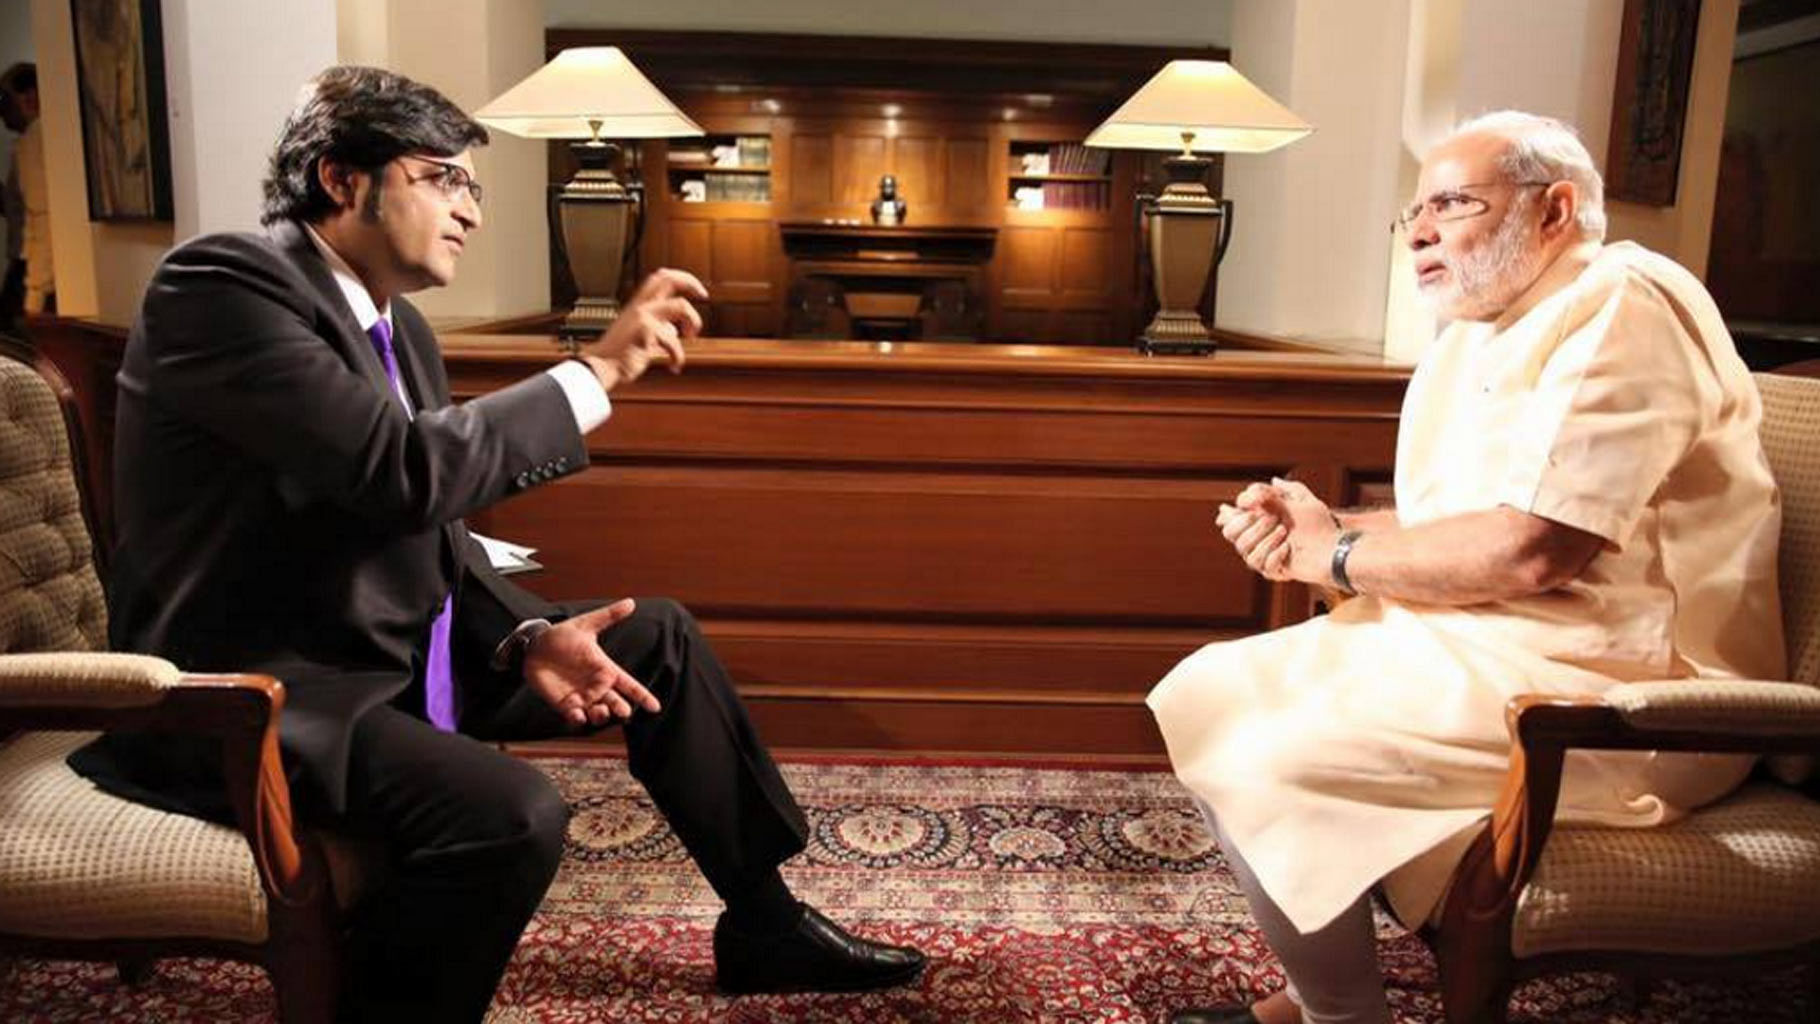 Narendra Modi’s interview with Arnab Goswami on Monday. (Photo Courtesy: <a href="https://twitter.com/TimesNow">Twitter/ Times Now</a>)